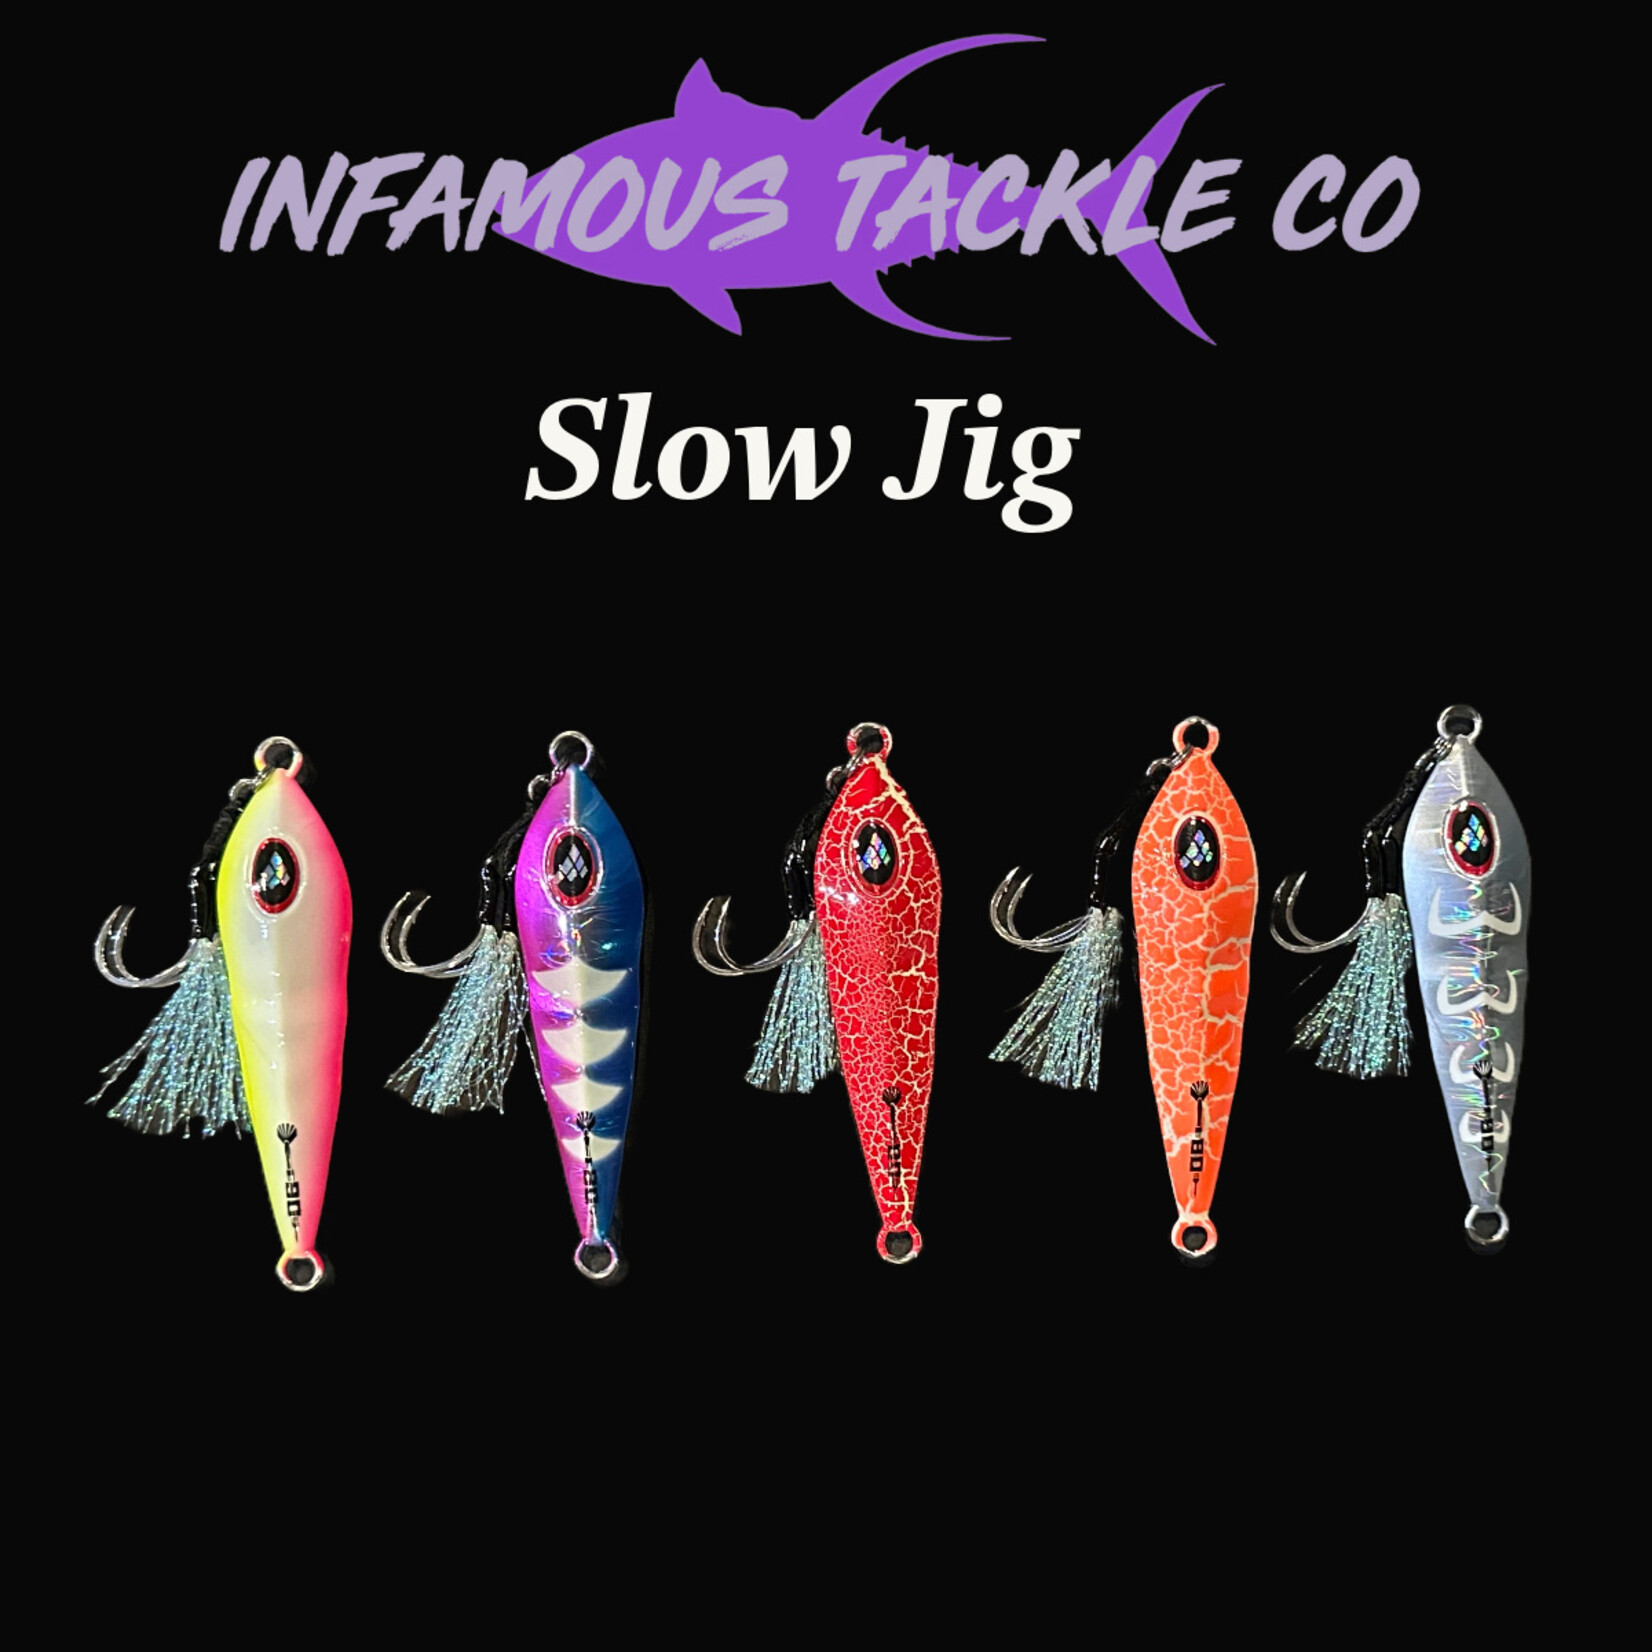 Infamous Tackle Co. Slow Jig